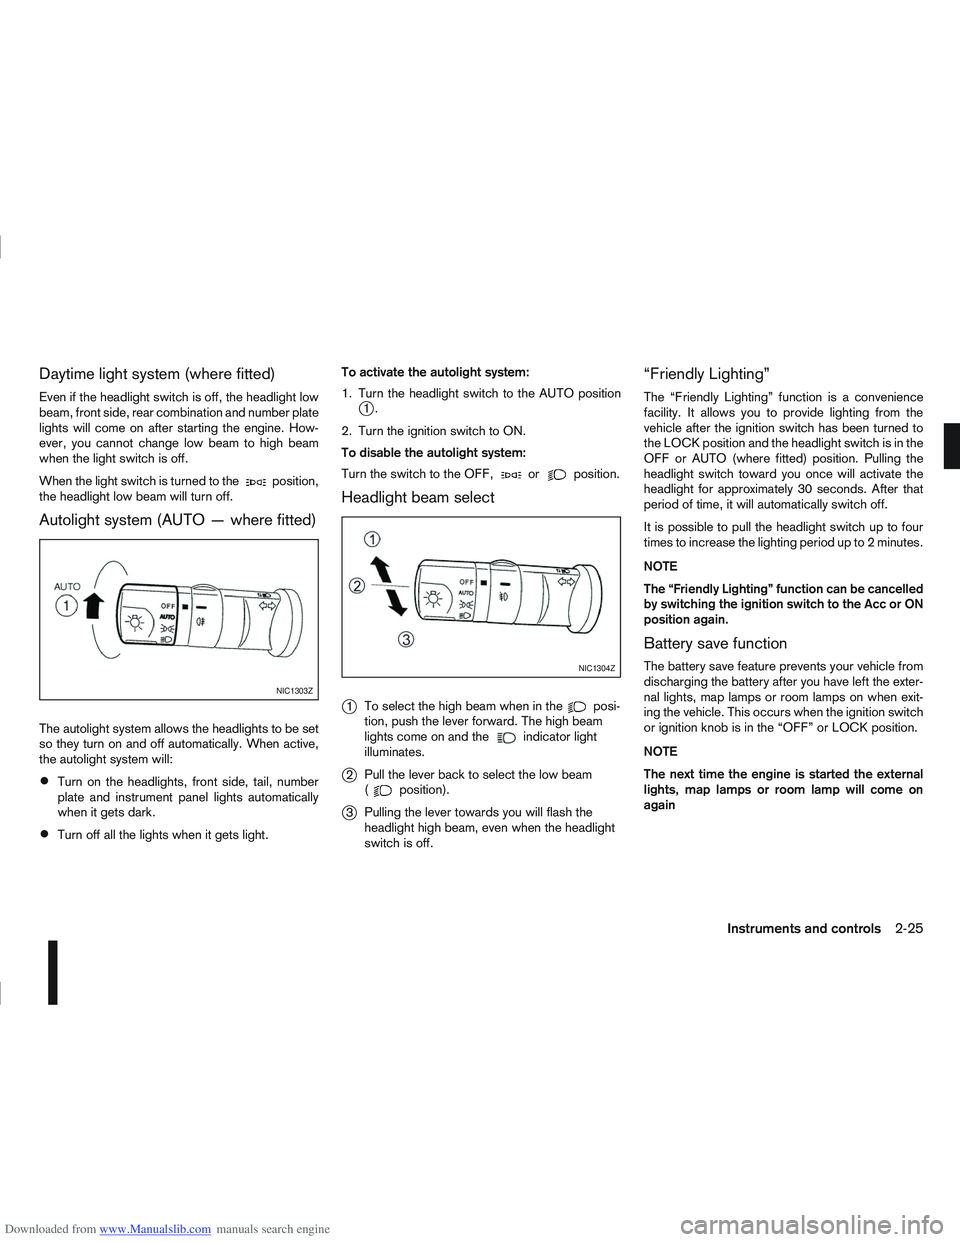 NISSAN QASHQAI 2013  Owners Manual Downloaded from www.Manualslib.com manuals search engine Daytime light system (where fitted)
Even if the headlight switch is off, the headlight low
beam, front side, rear combination and number plate
